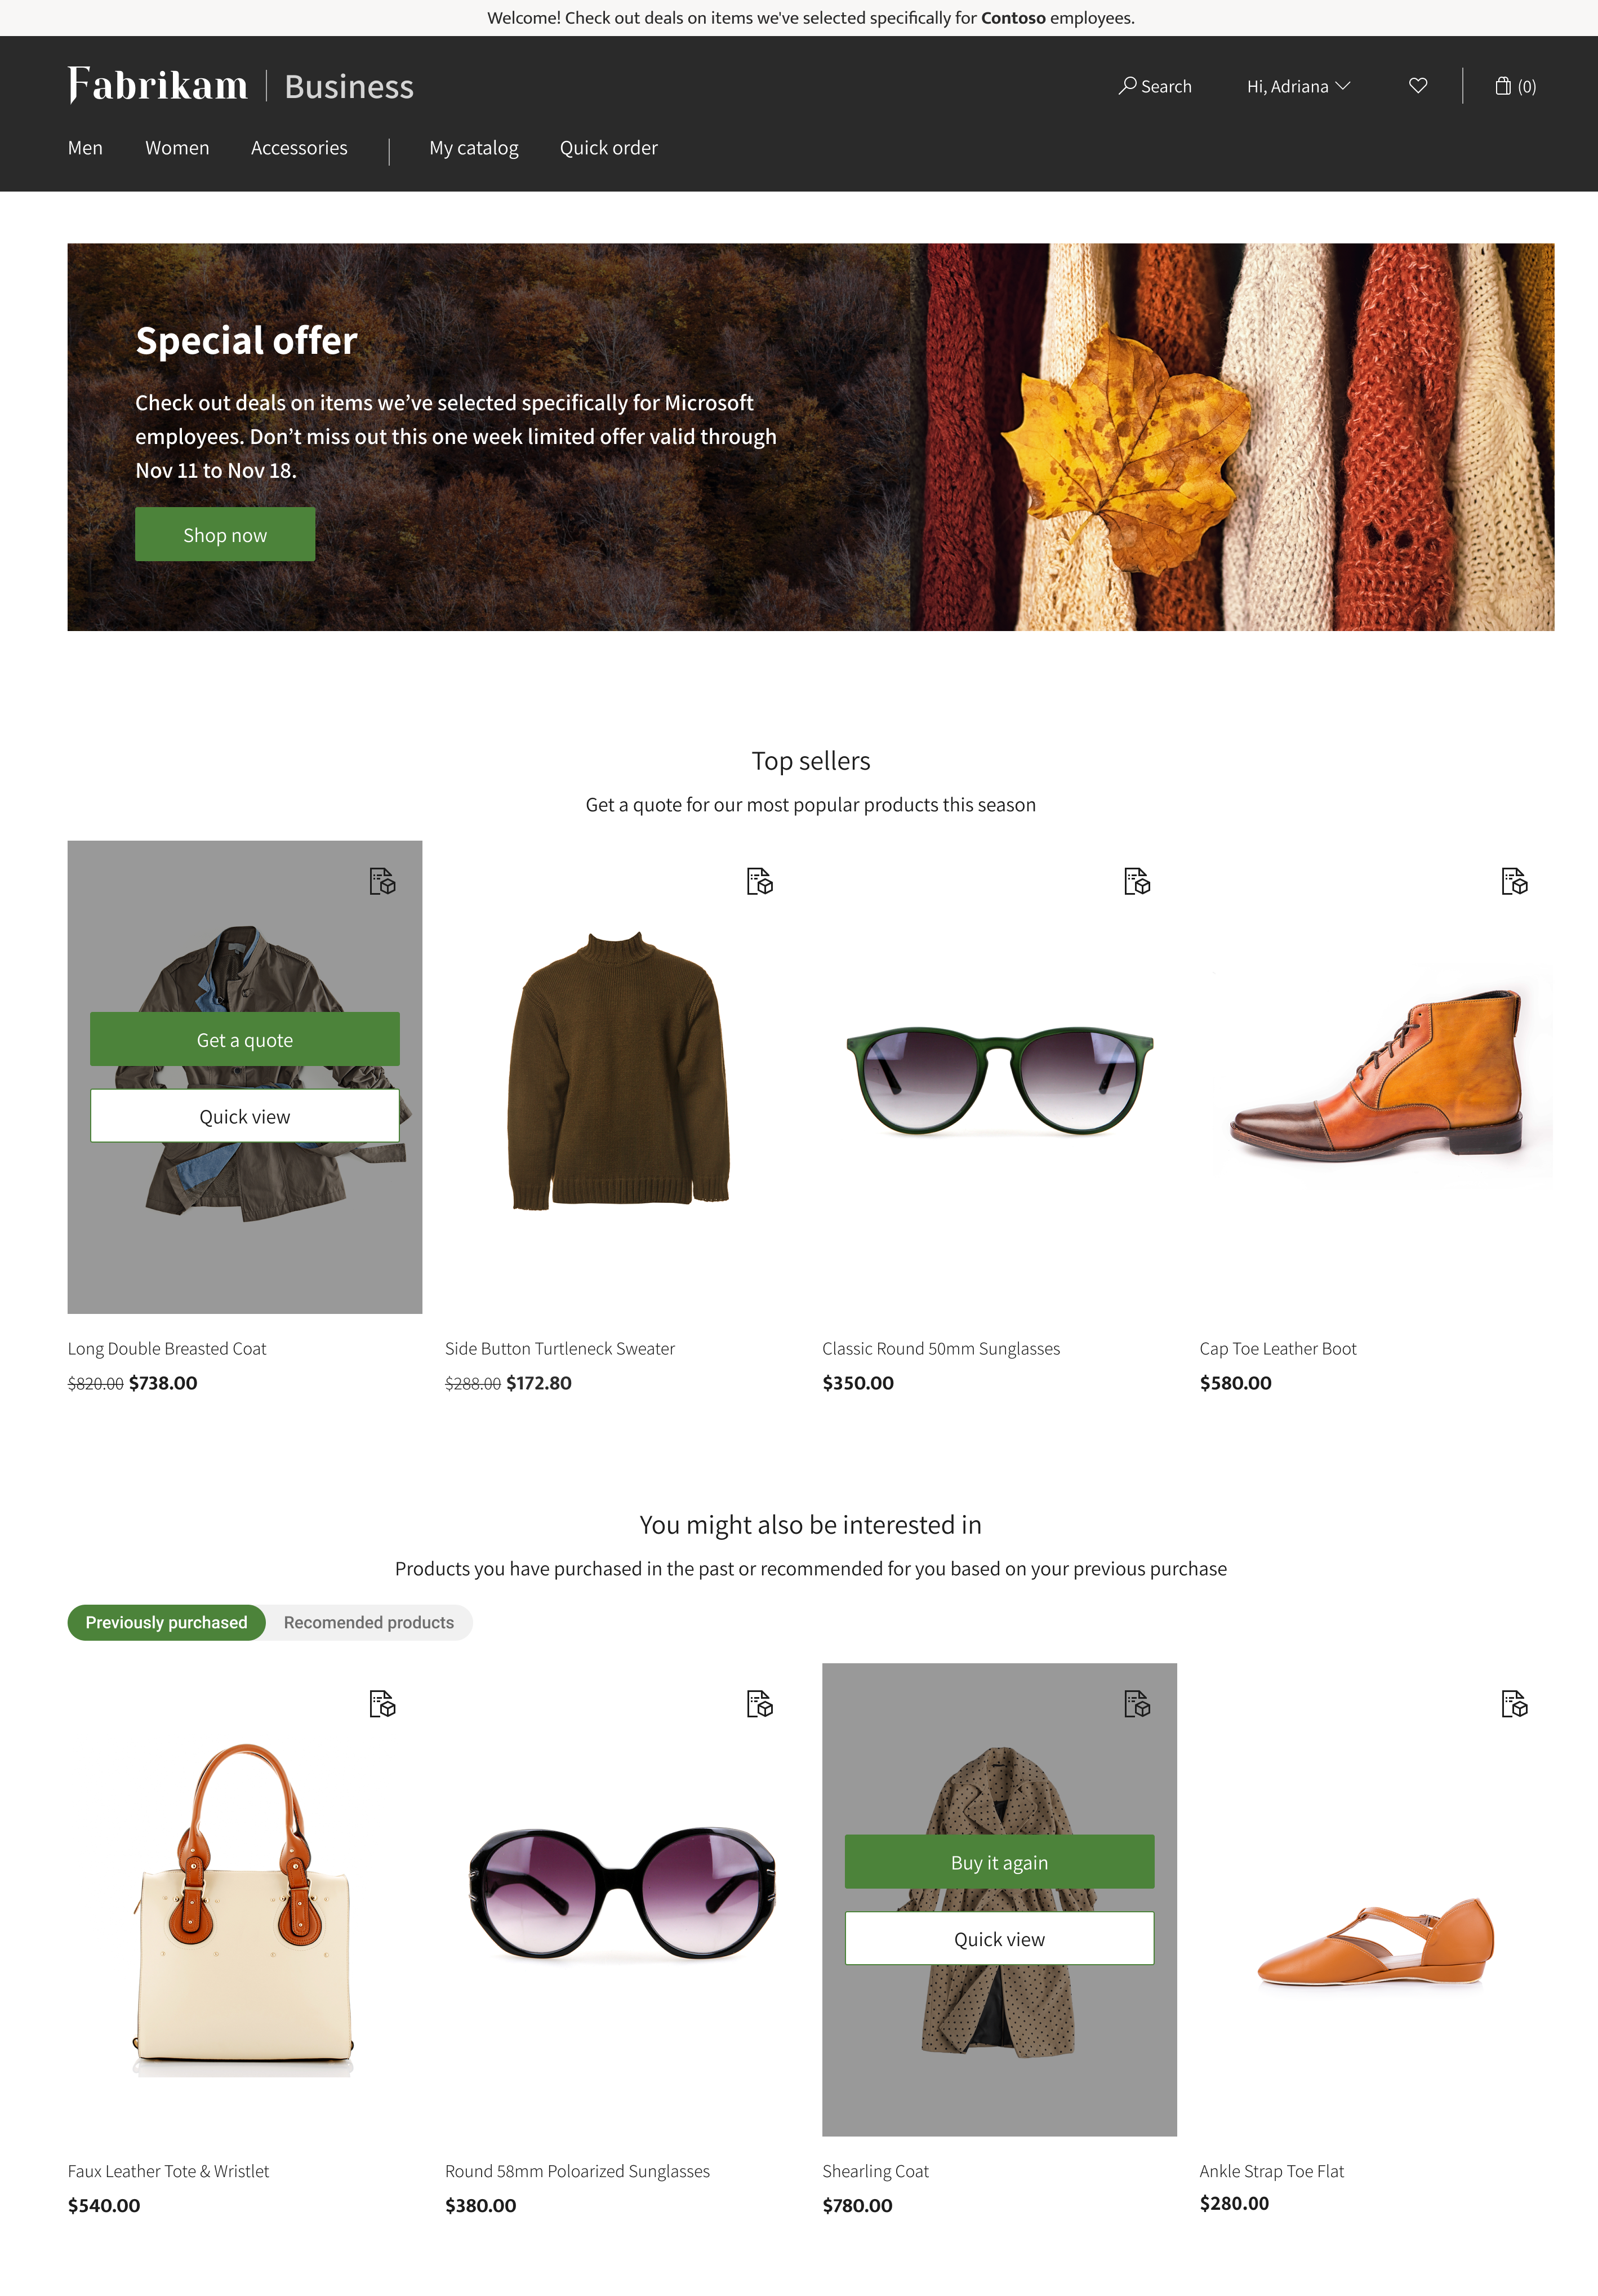 An e-commerce page with Fabrikam Business header and Special offer banner at the top. Product images are showcased with headers of “Top Sellers” and “You might also be interested in”